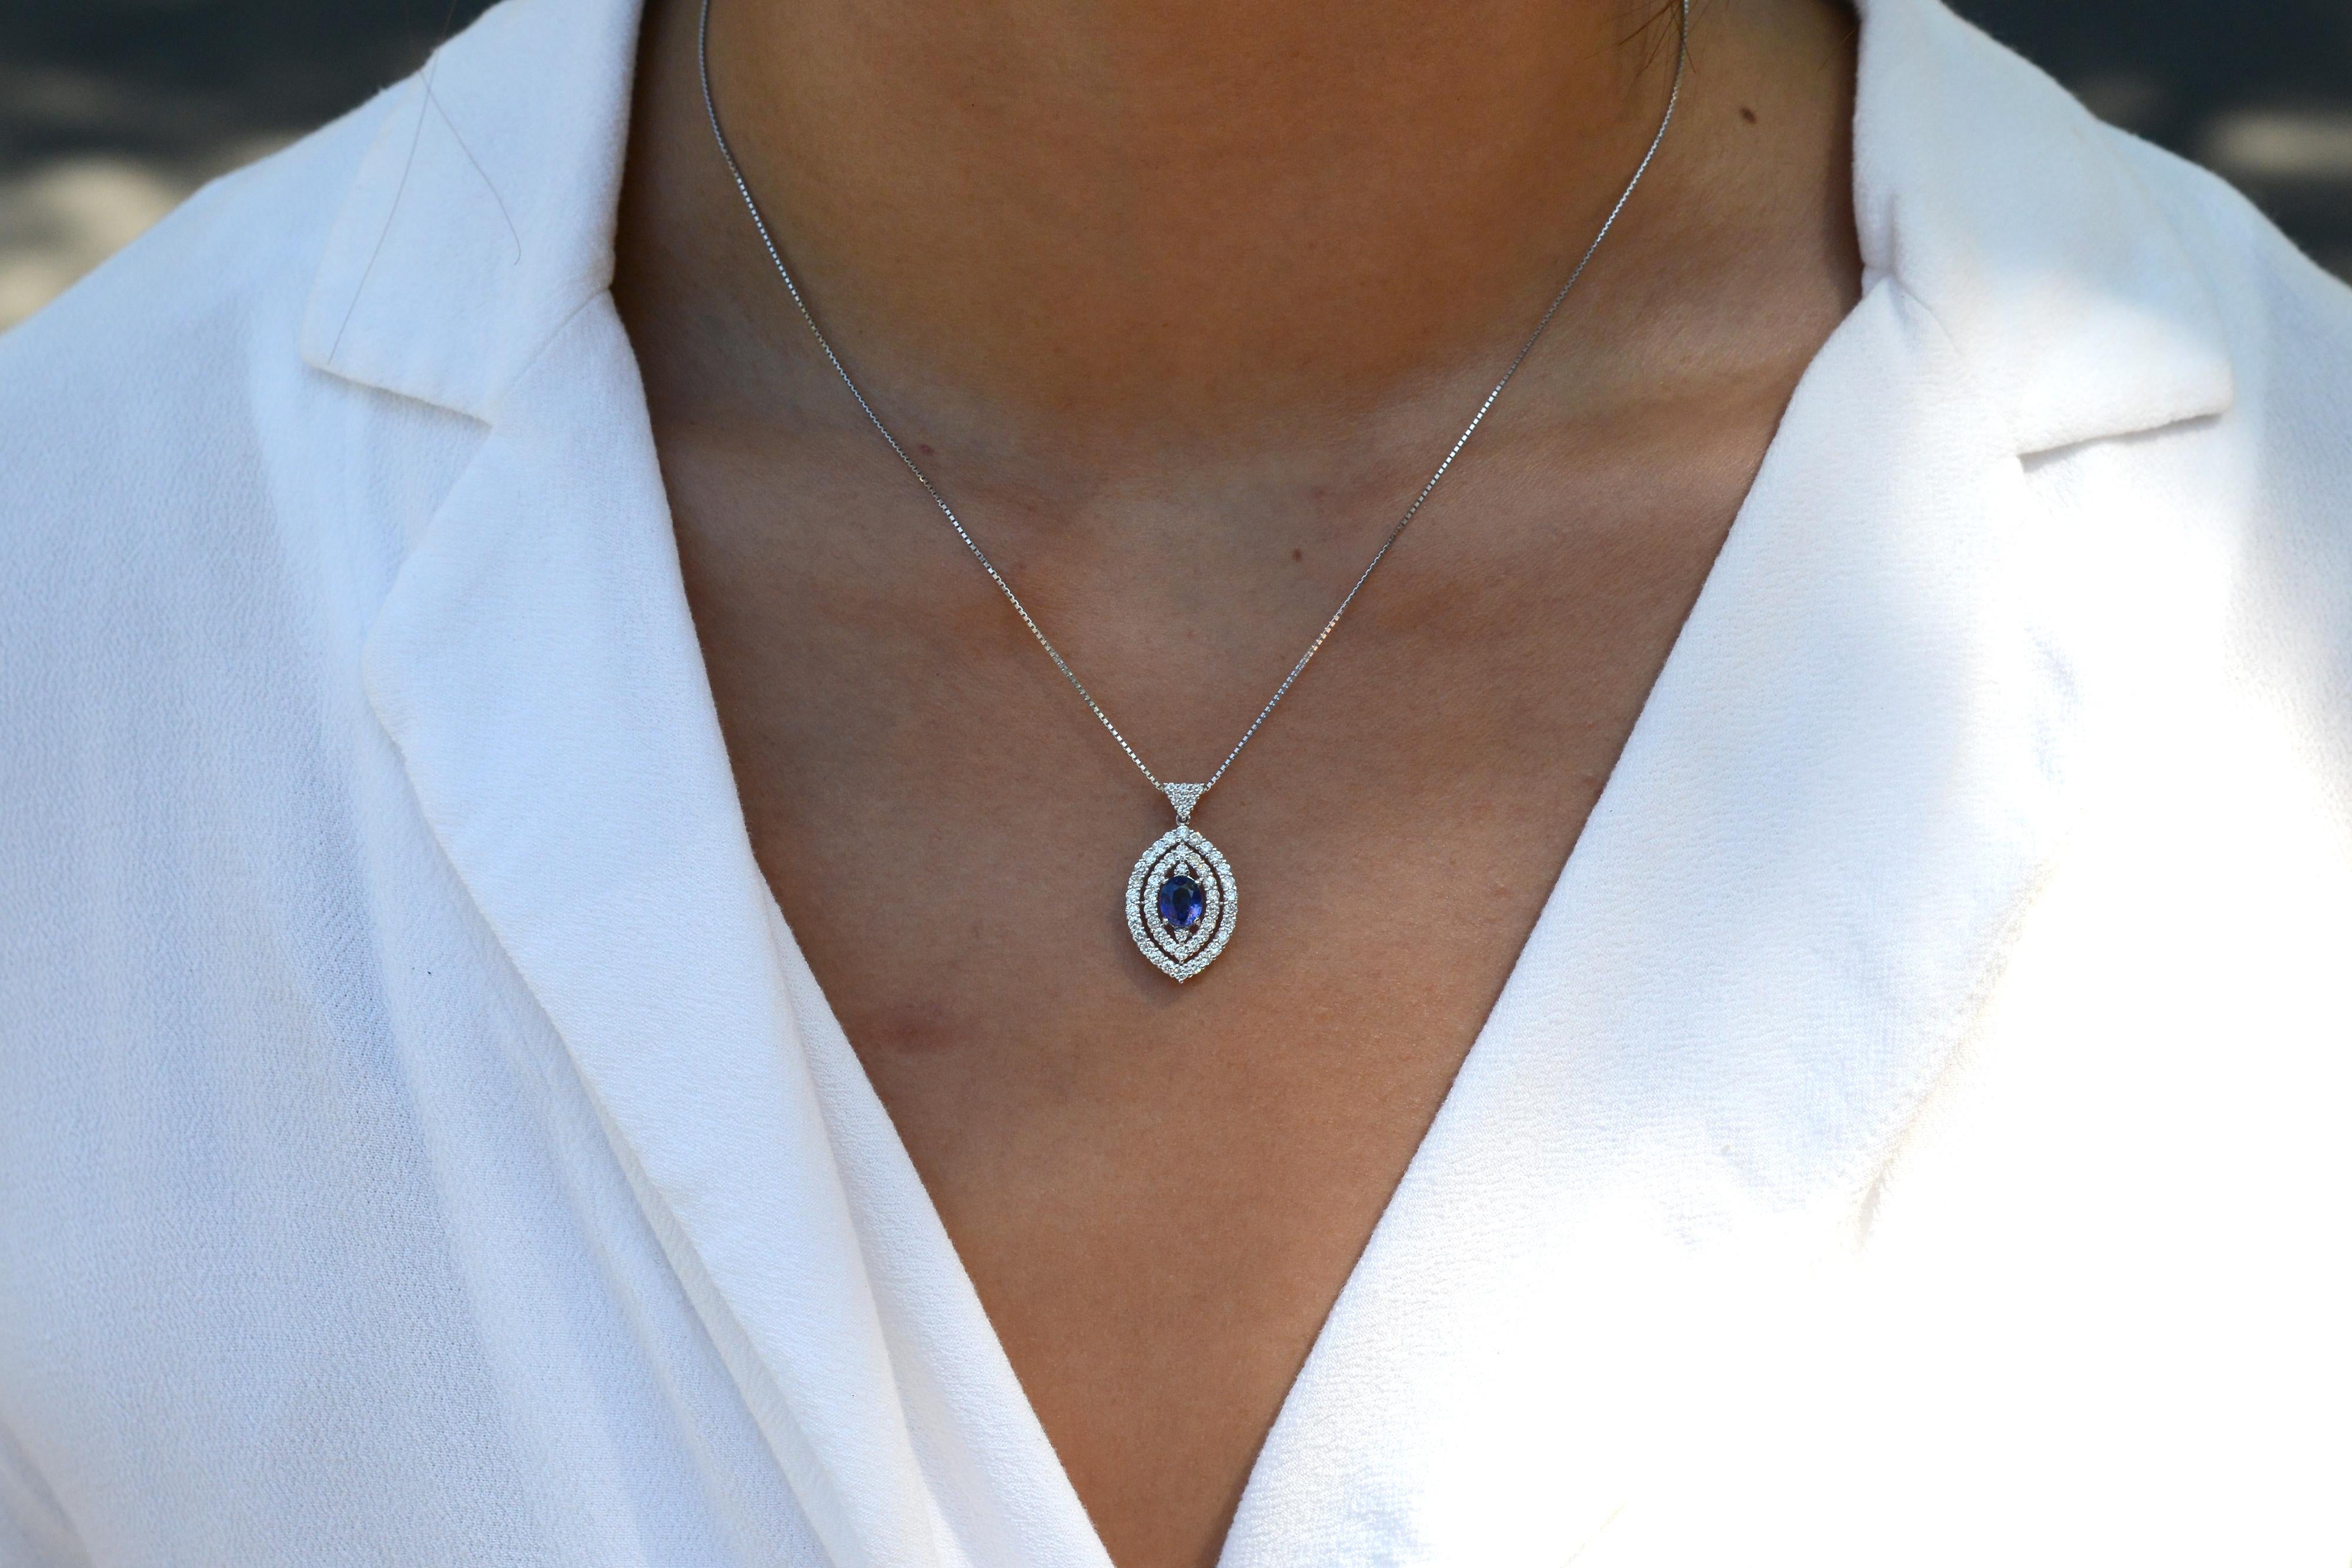 This stunning contemporary bolo necklace features a unique double halo design with an adjustable chain length for easy styling. The central gemstone, a 1 carat natural oval sapphire with a vivid deep blue color. Encircled with 0.88 carats of natural